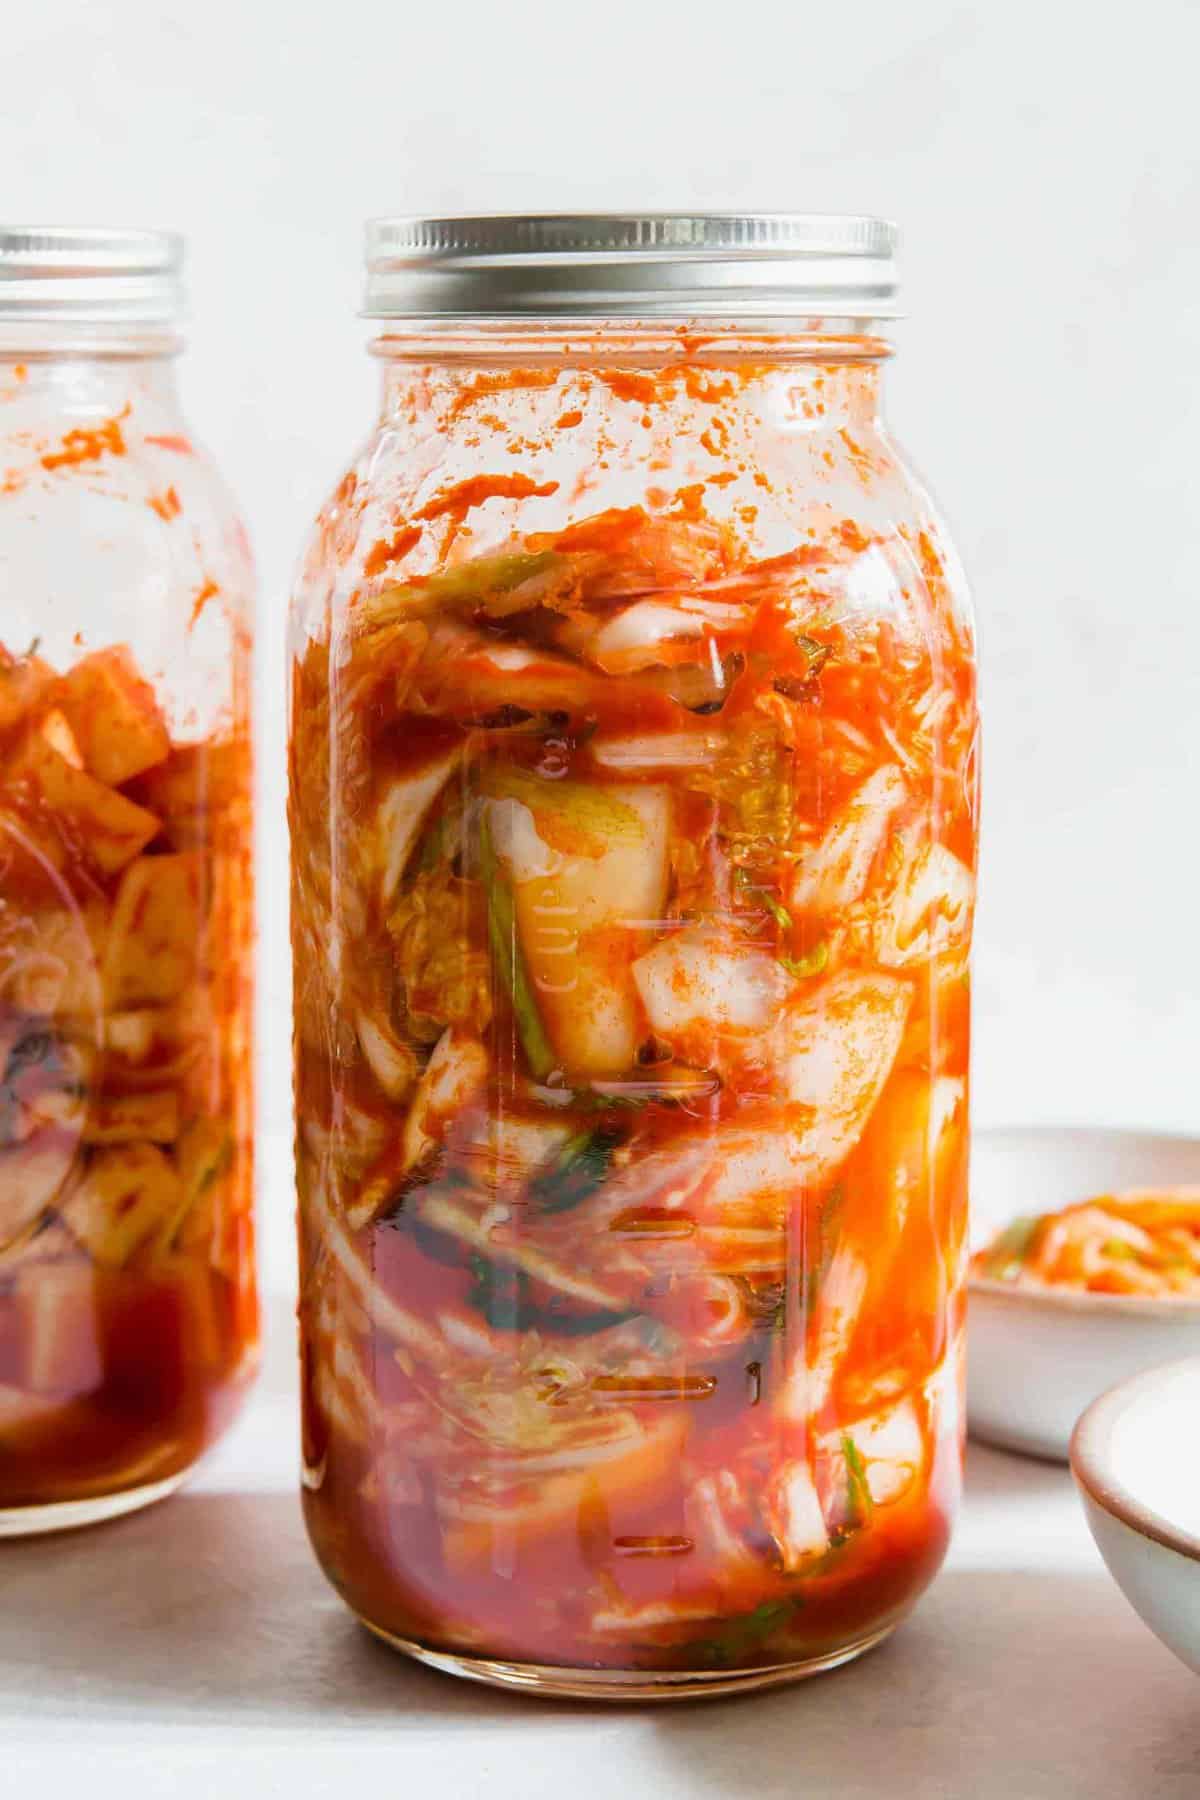 How To Make Homemade Kimchi Kimchee Making Kimchi At Home,Summer Drinks With Rum